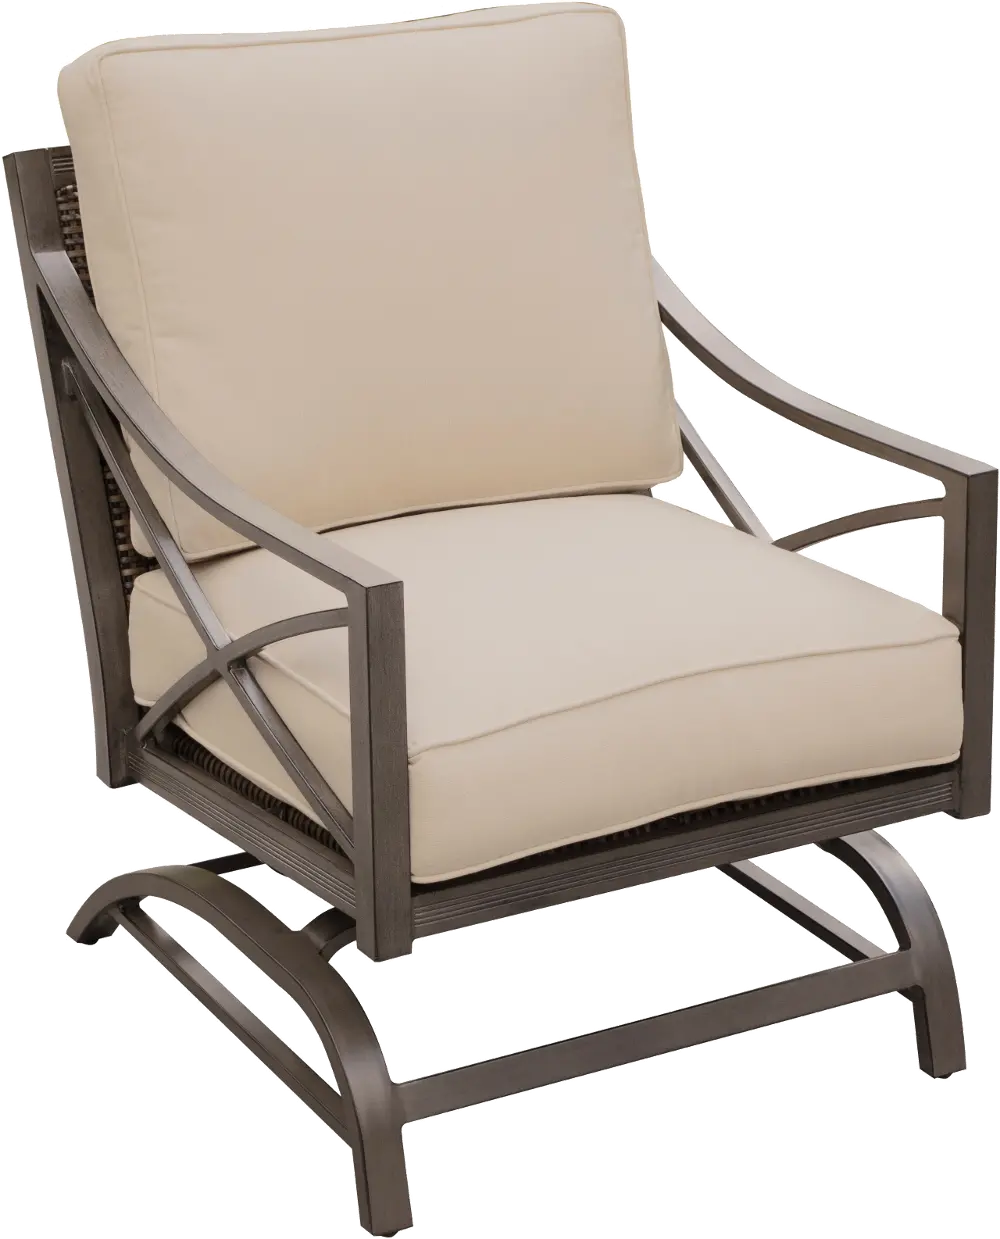 AGH13722P01/RKRCHAIR Outdoor Patio Rocking Chair - Davenport-1